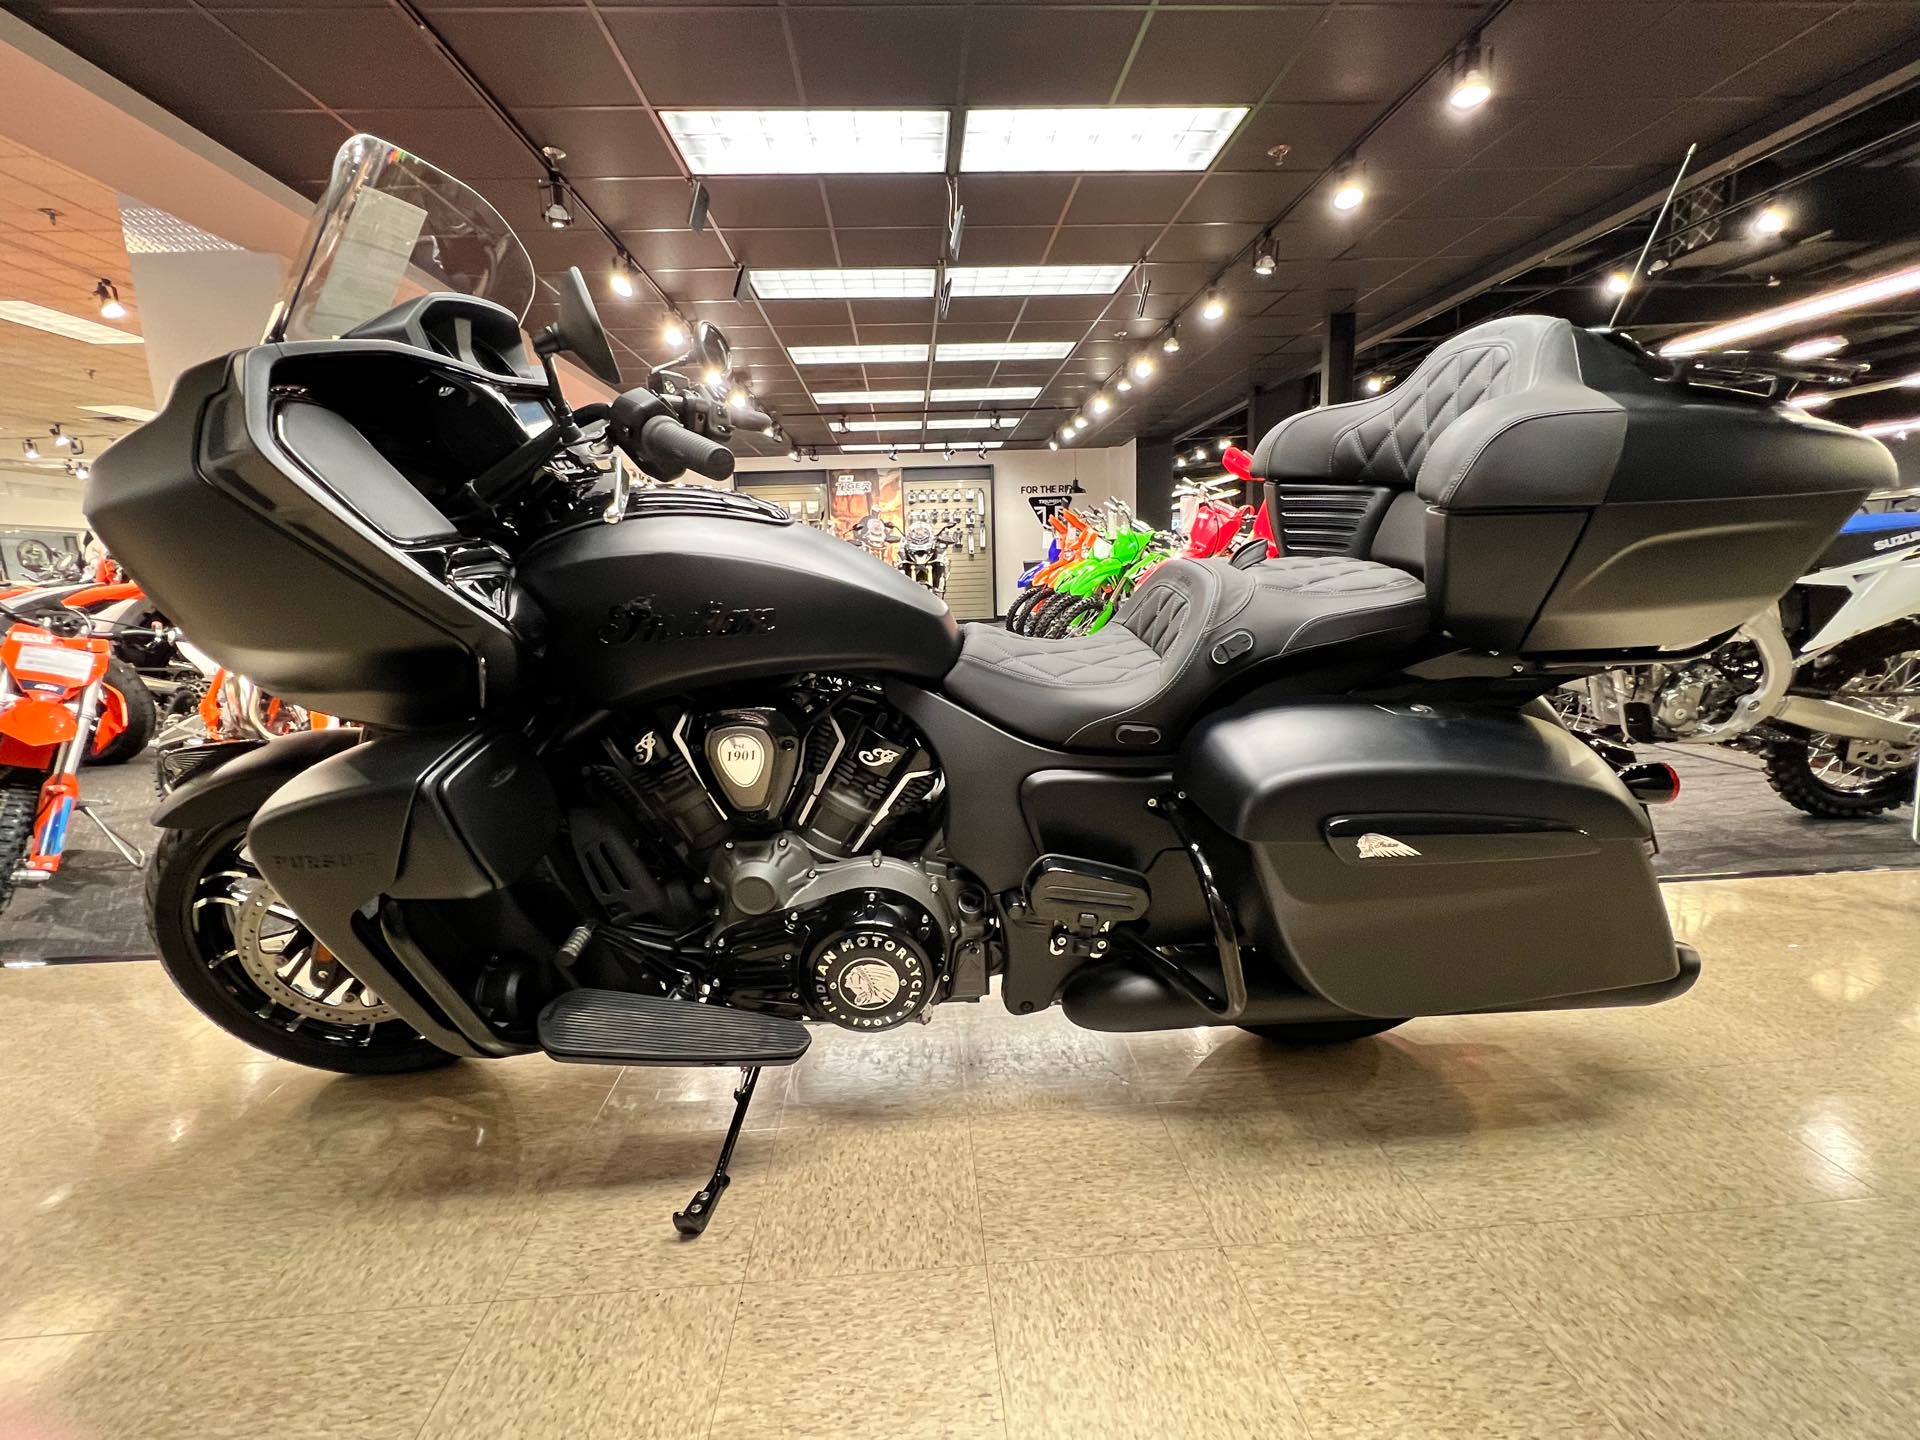 2023 Indian Motorcycle Pursuit Dark Horse with Premium Package at Sloans Motorcycle ATV, Murfreesboro, TN, 37129